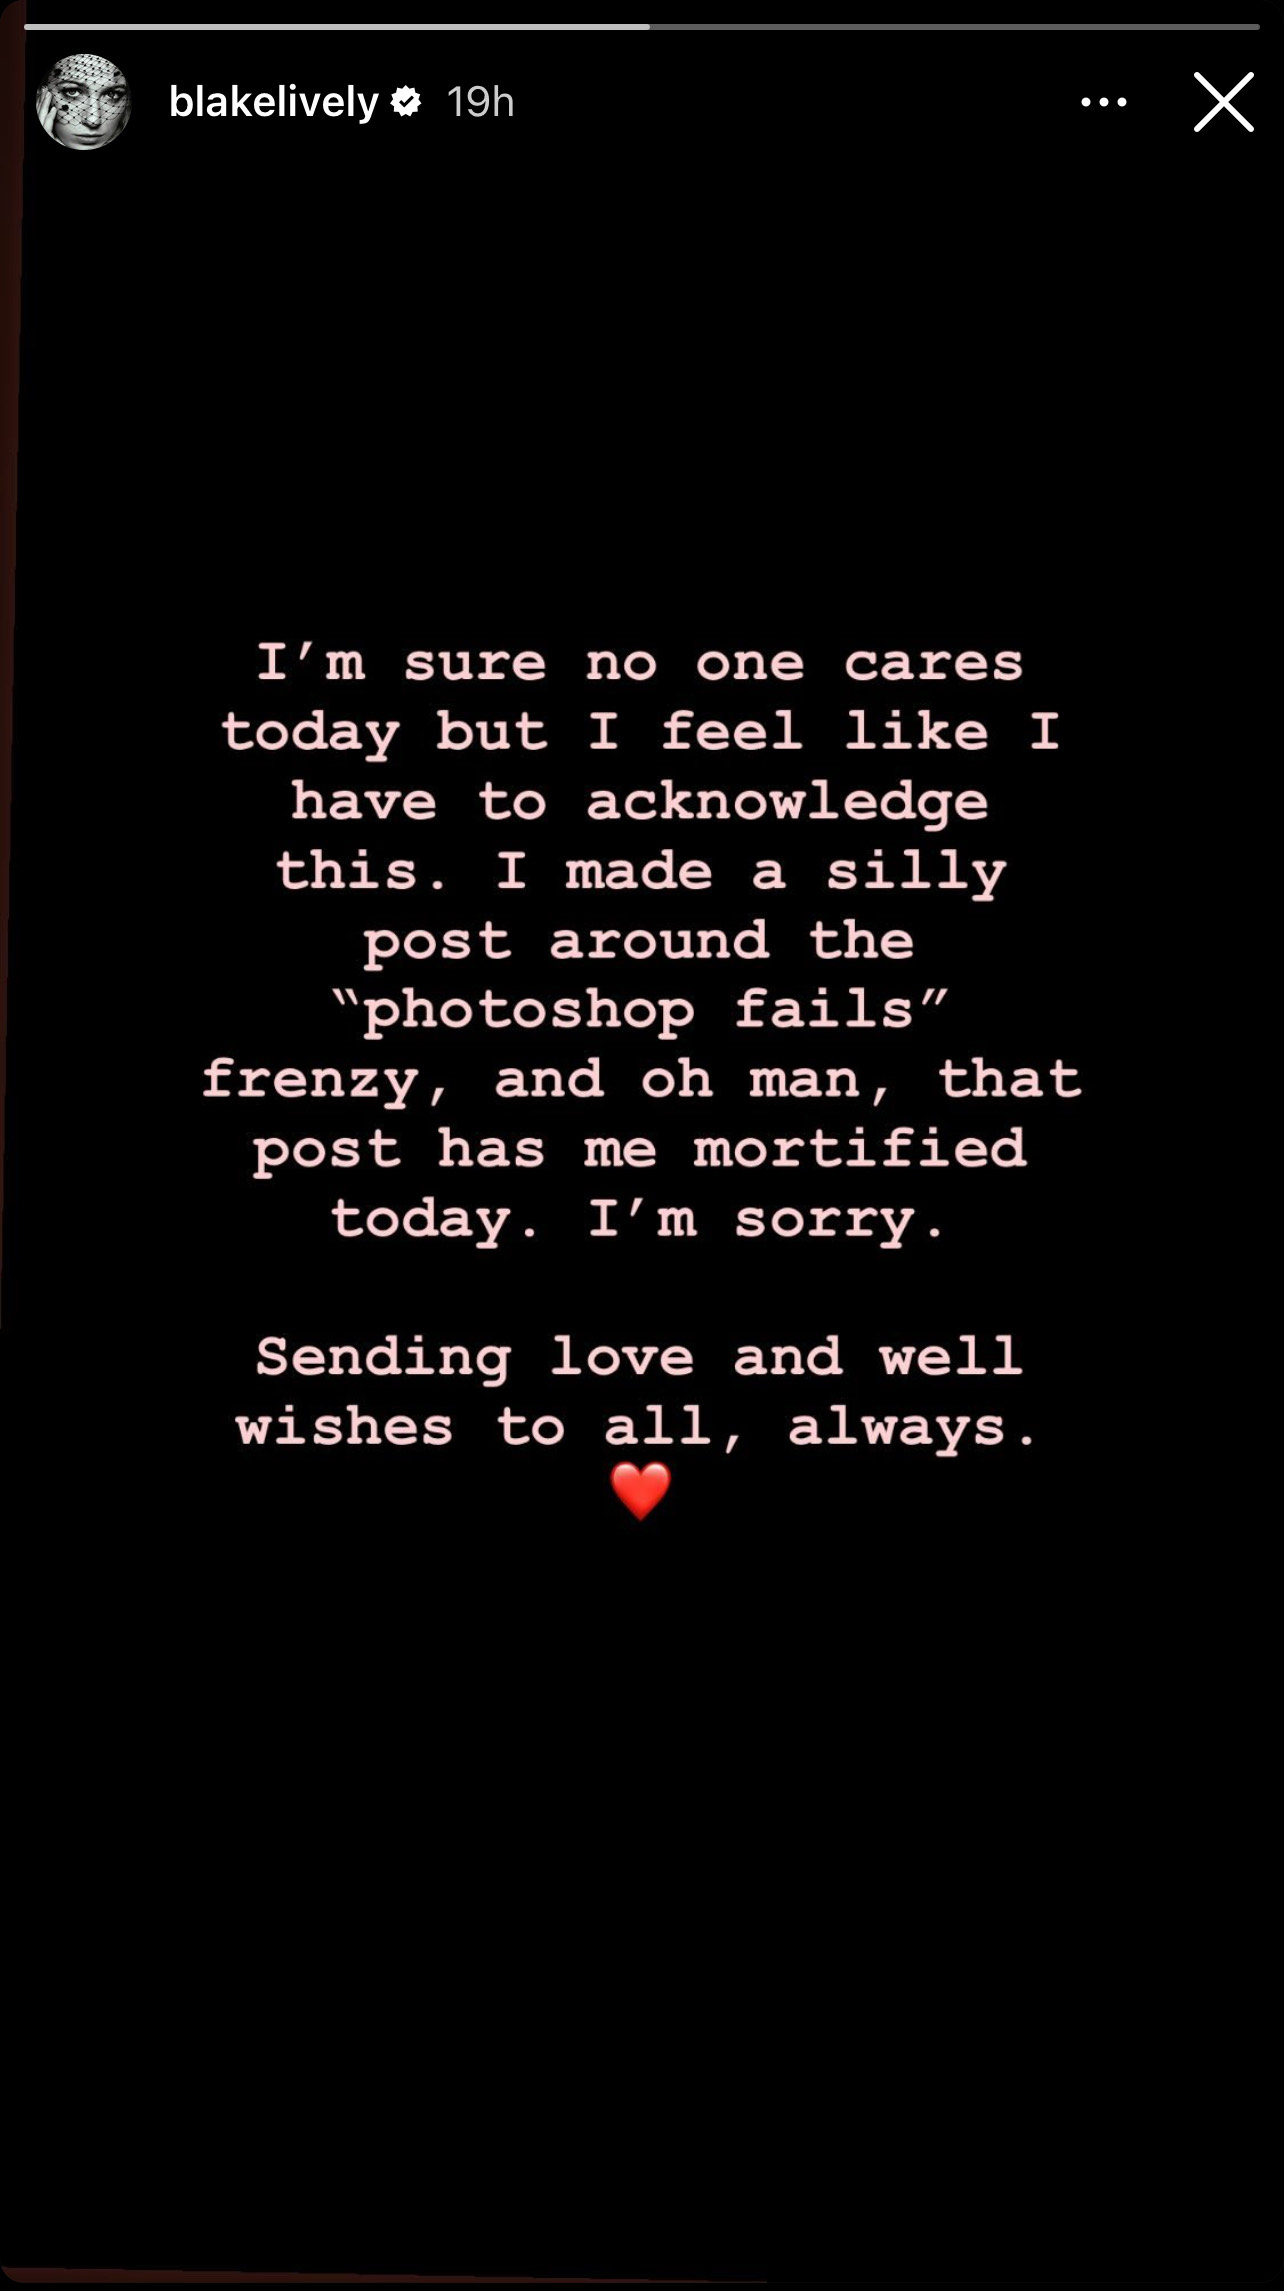 Text from Blake Lively&#x27;s social media post expressing her feelings about the attention to her clothing and the frenzy around perceived photoshop fails